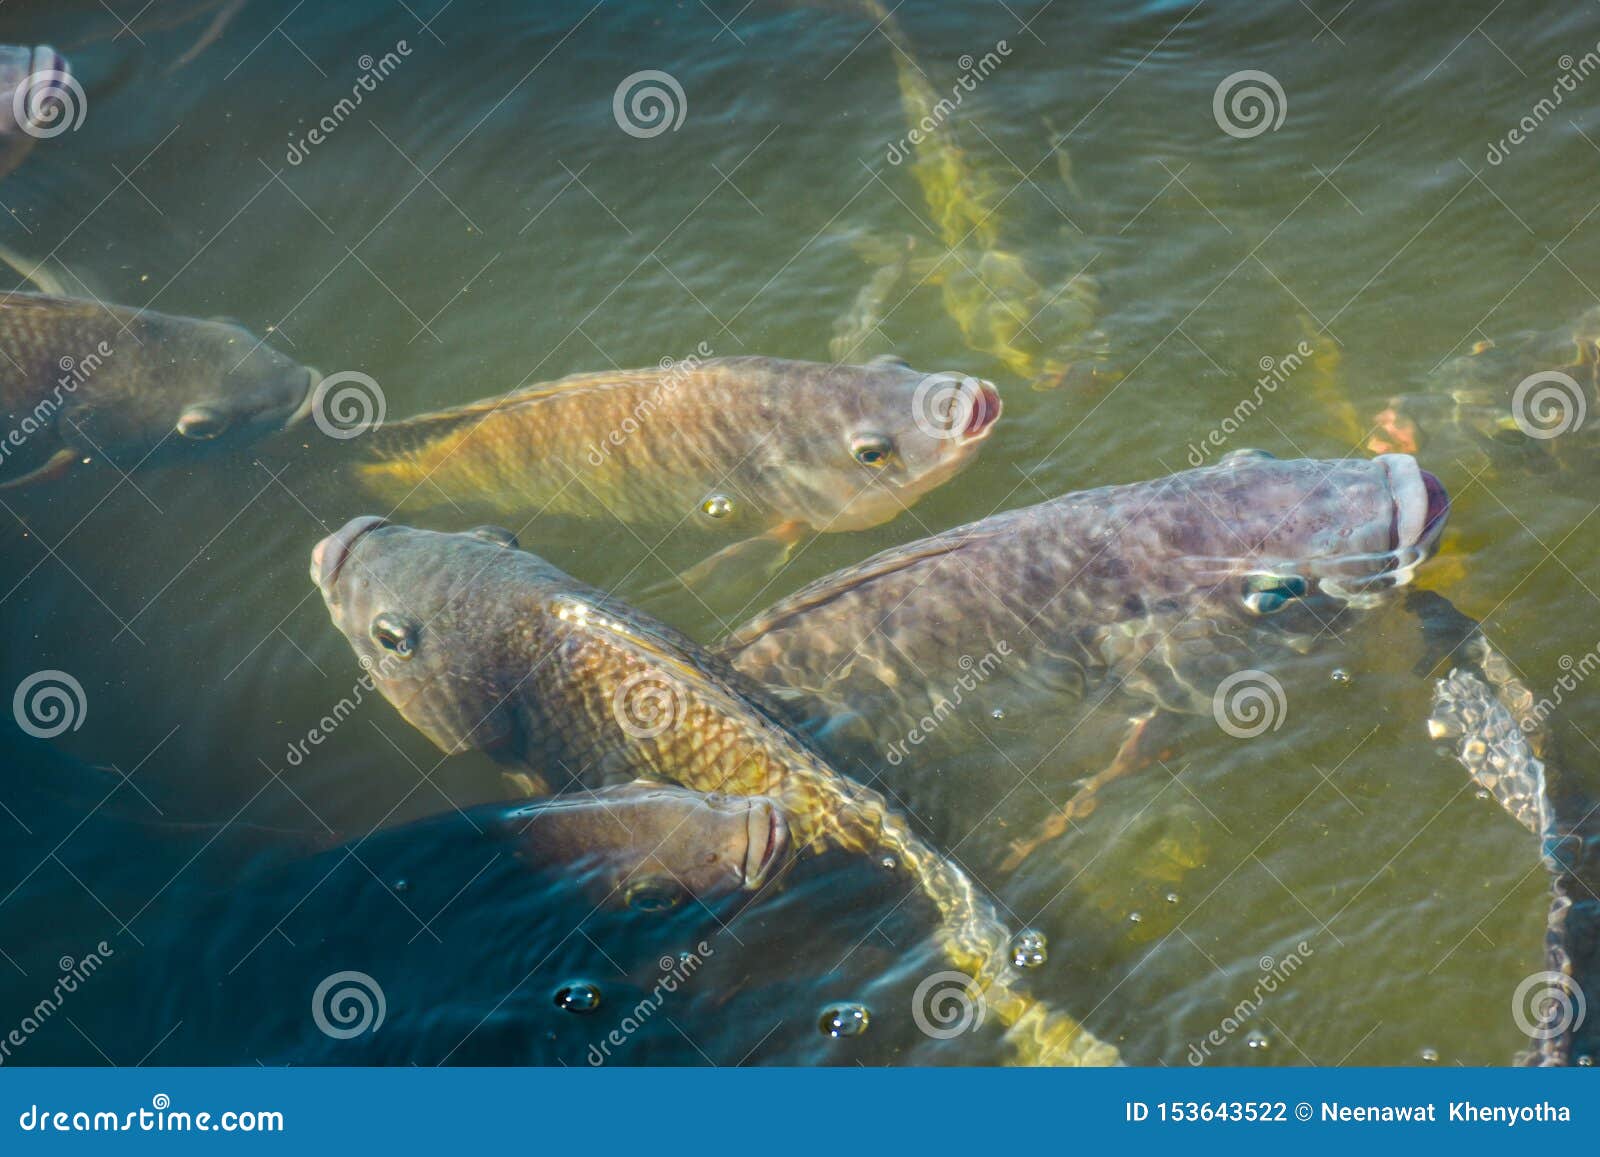 Nile Tilapia, Freshwater Fish that is Popularly Used for Industrial Farming  because of Its Fast Growing, Easy To Raise, Good Yield Stock Photo - Image  of feeding, fish: 153643522